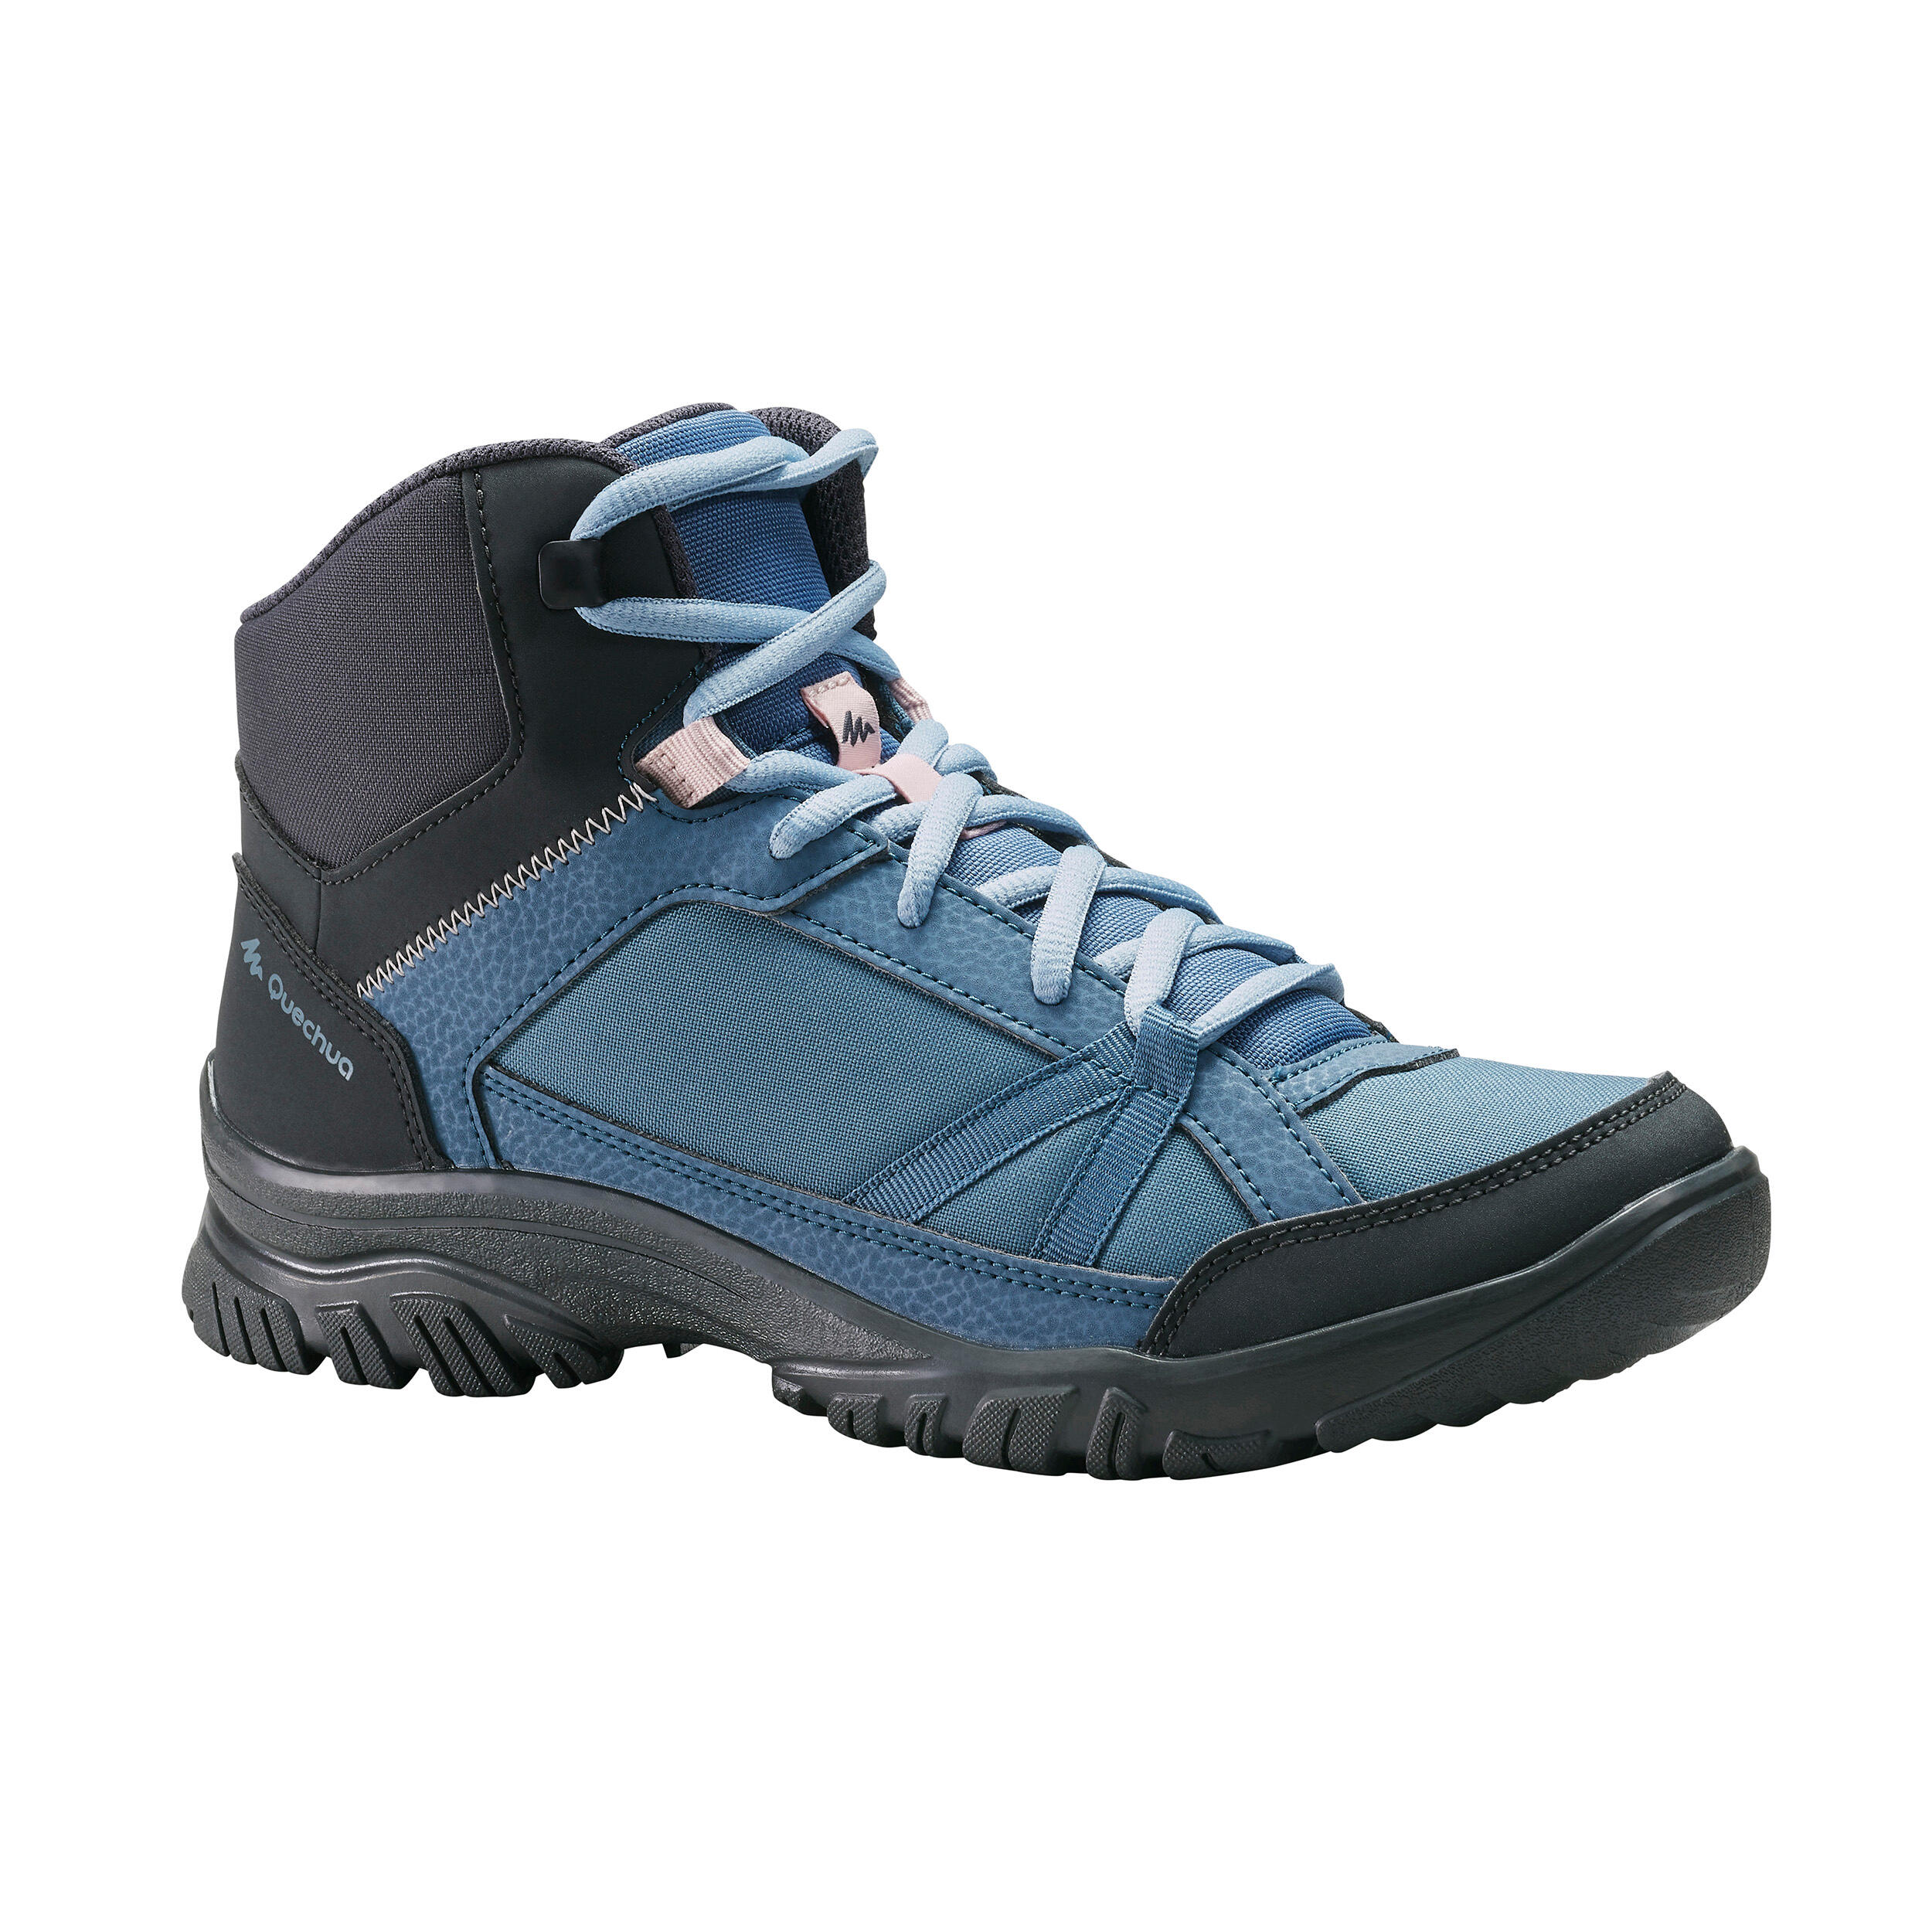 Women’s Hiking Boots - NH100 Mid 2/5